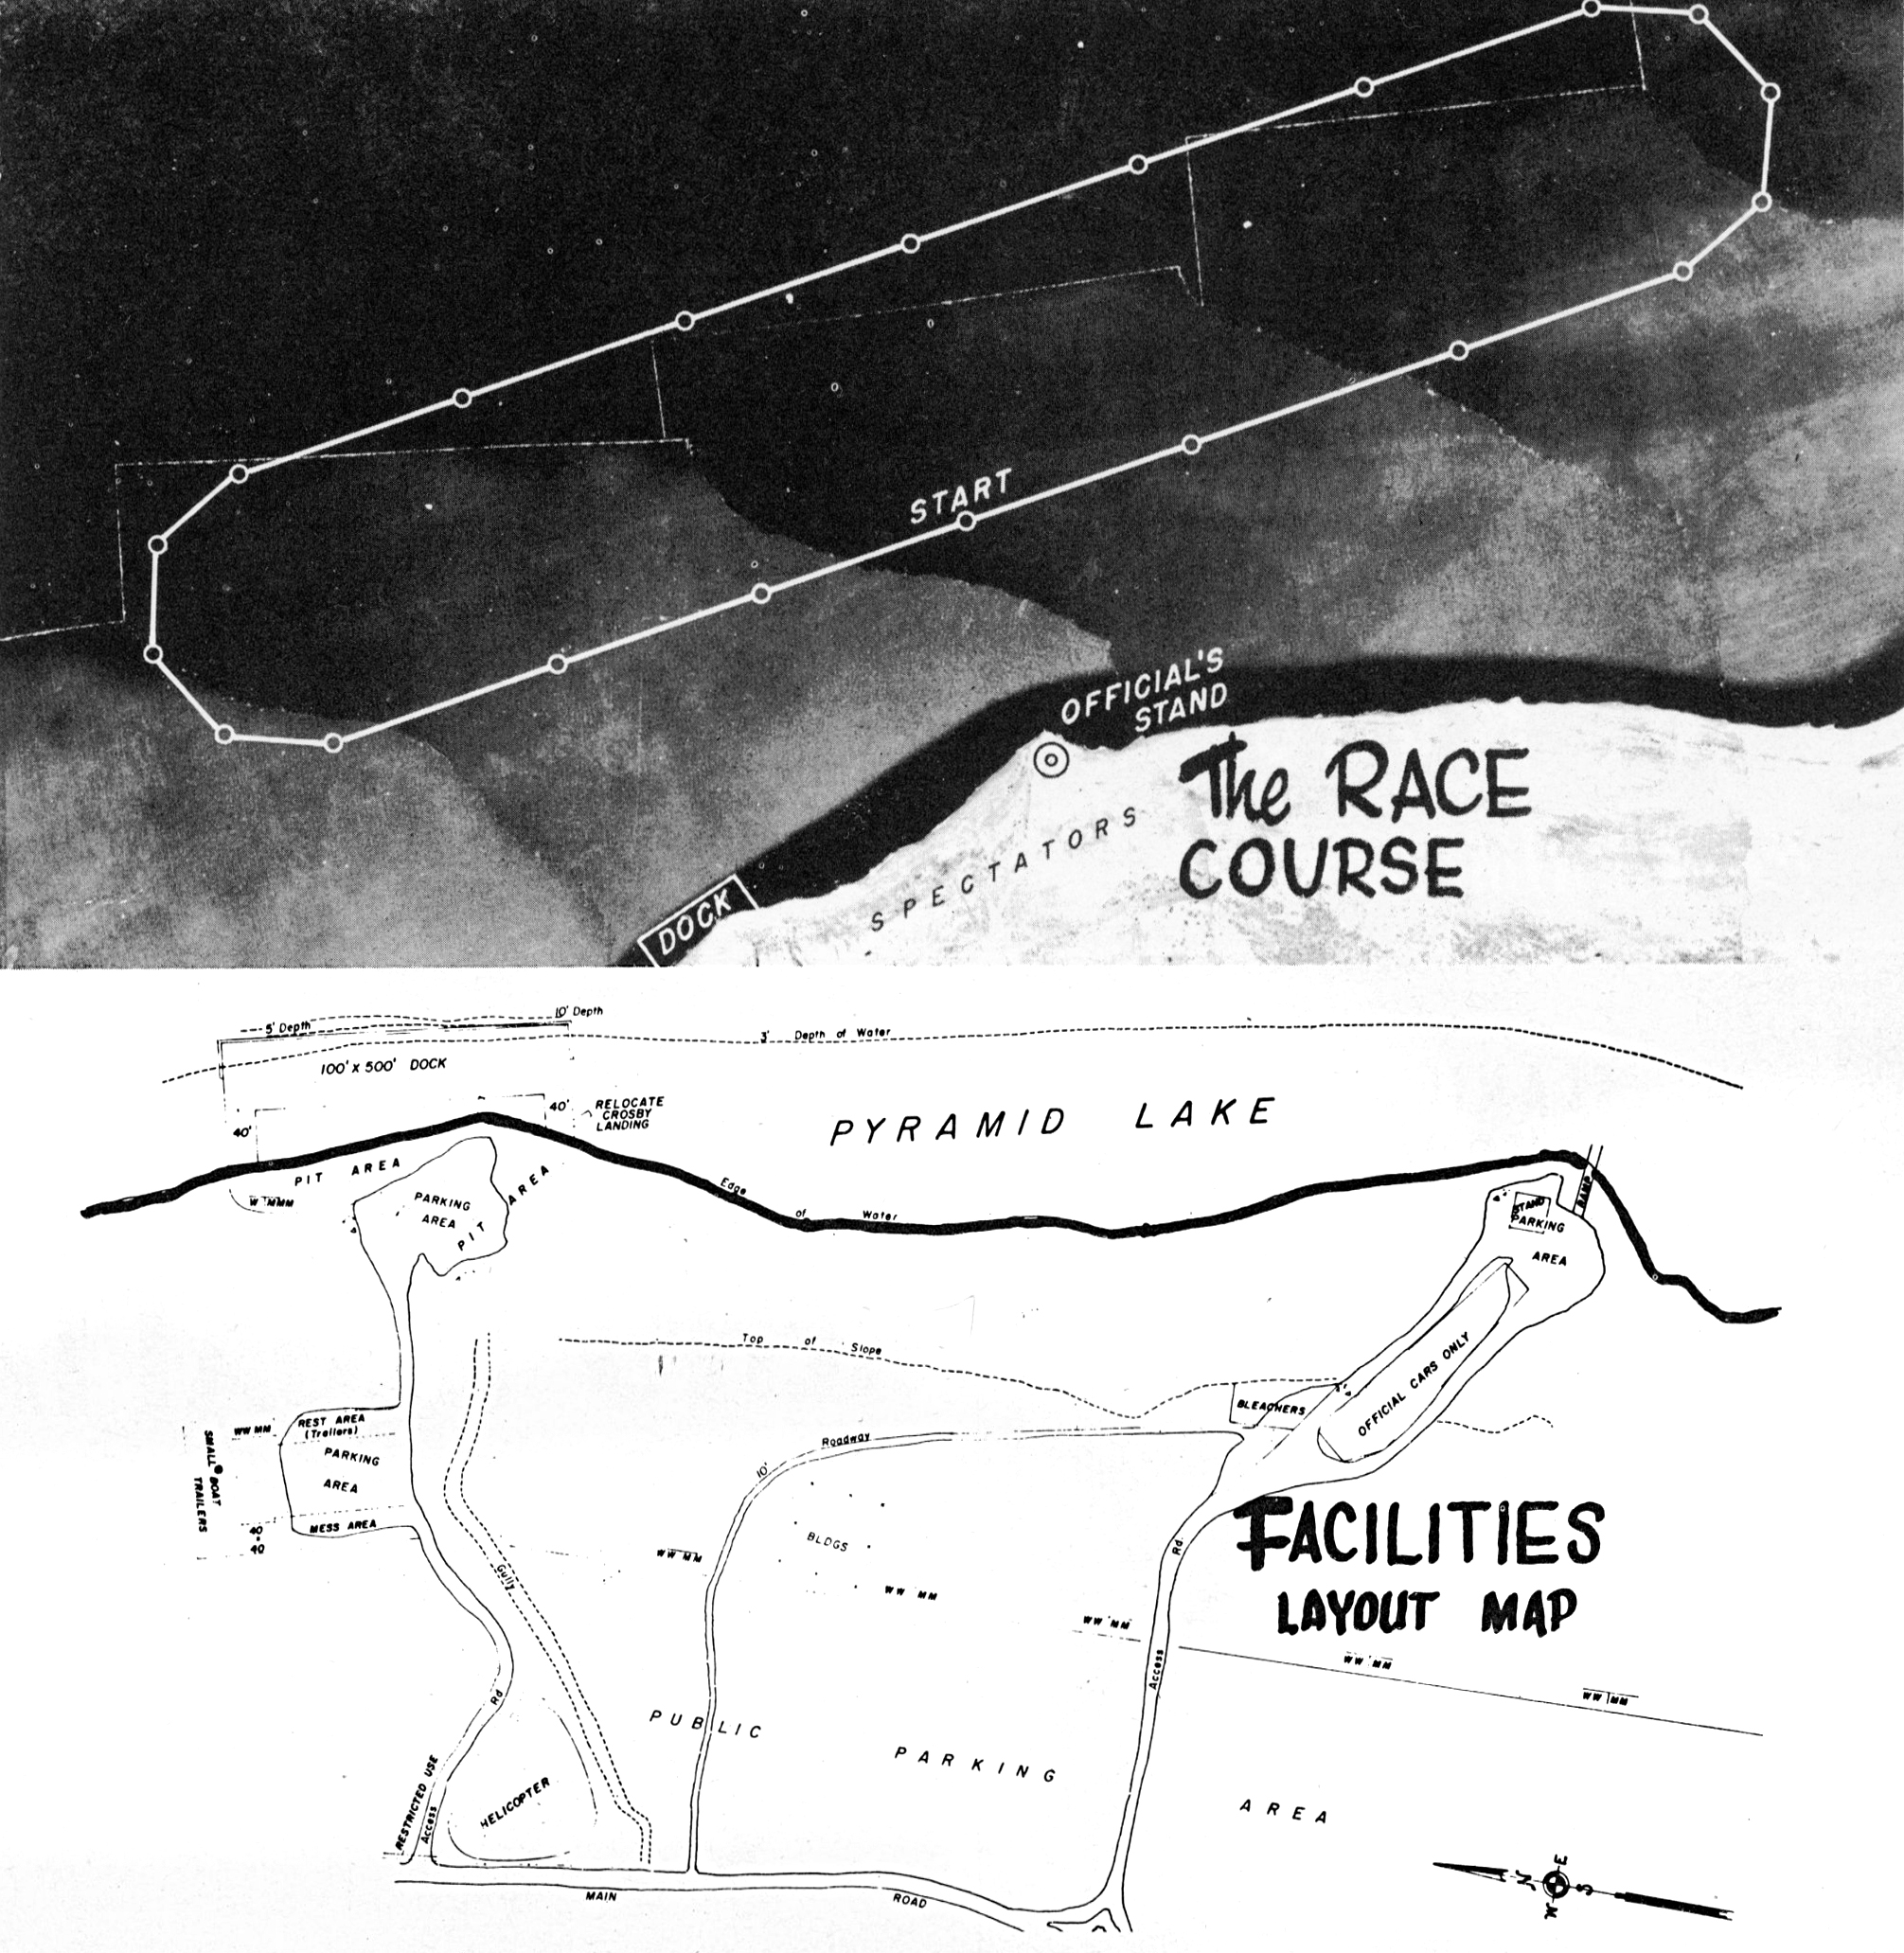 The Race Course and Facilities Layout Map